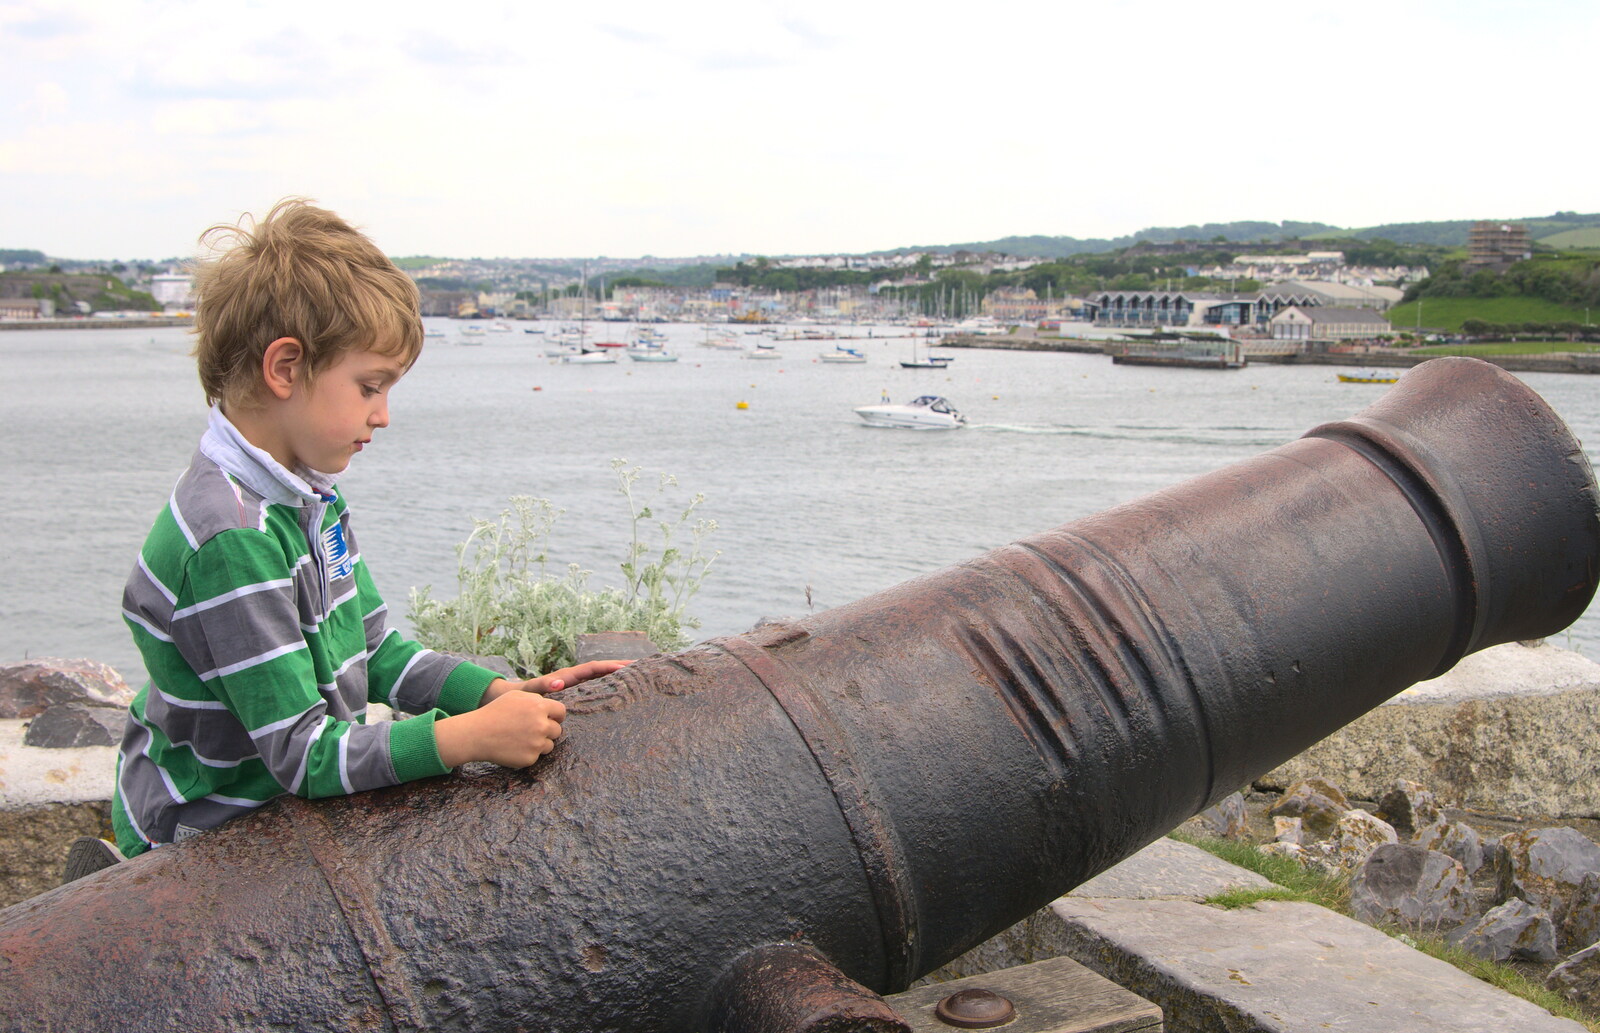 Fred pokes at a cannon from A Tamar River Trip, Plymouth, Devon - 30th May 2016